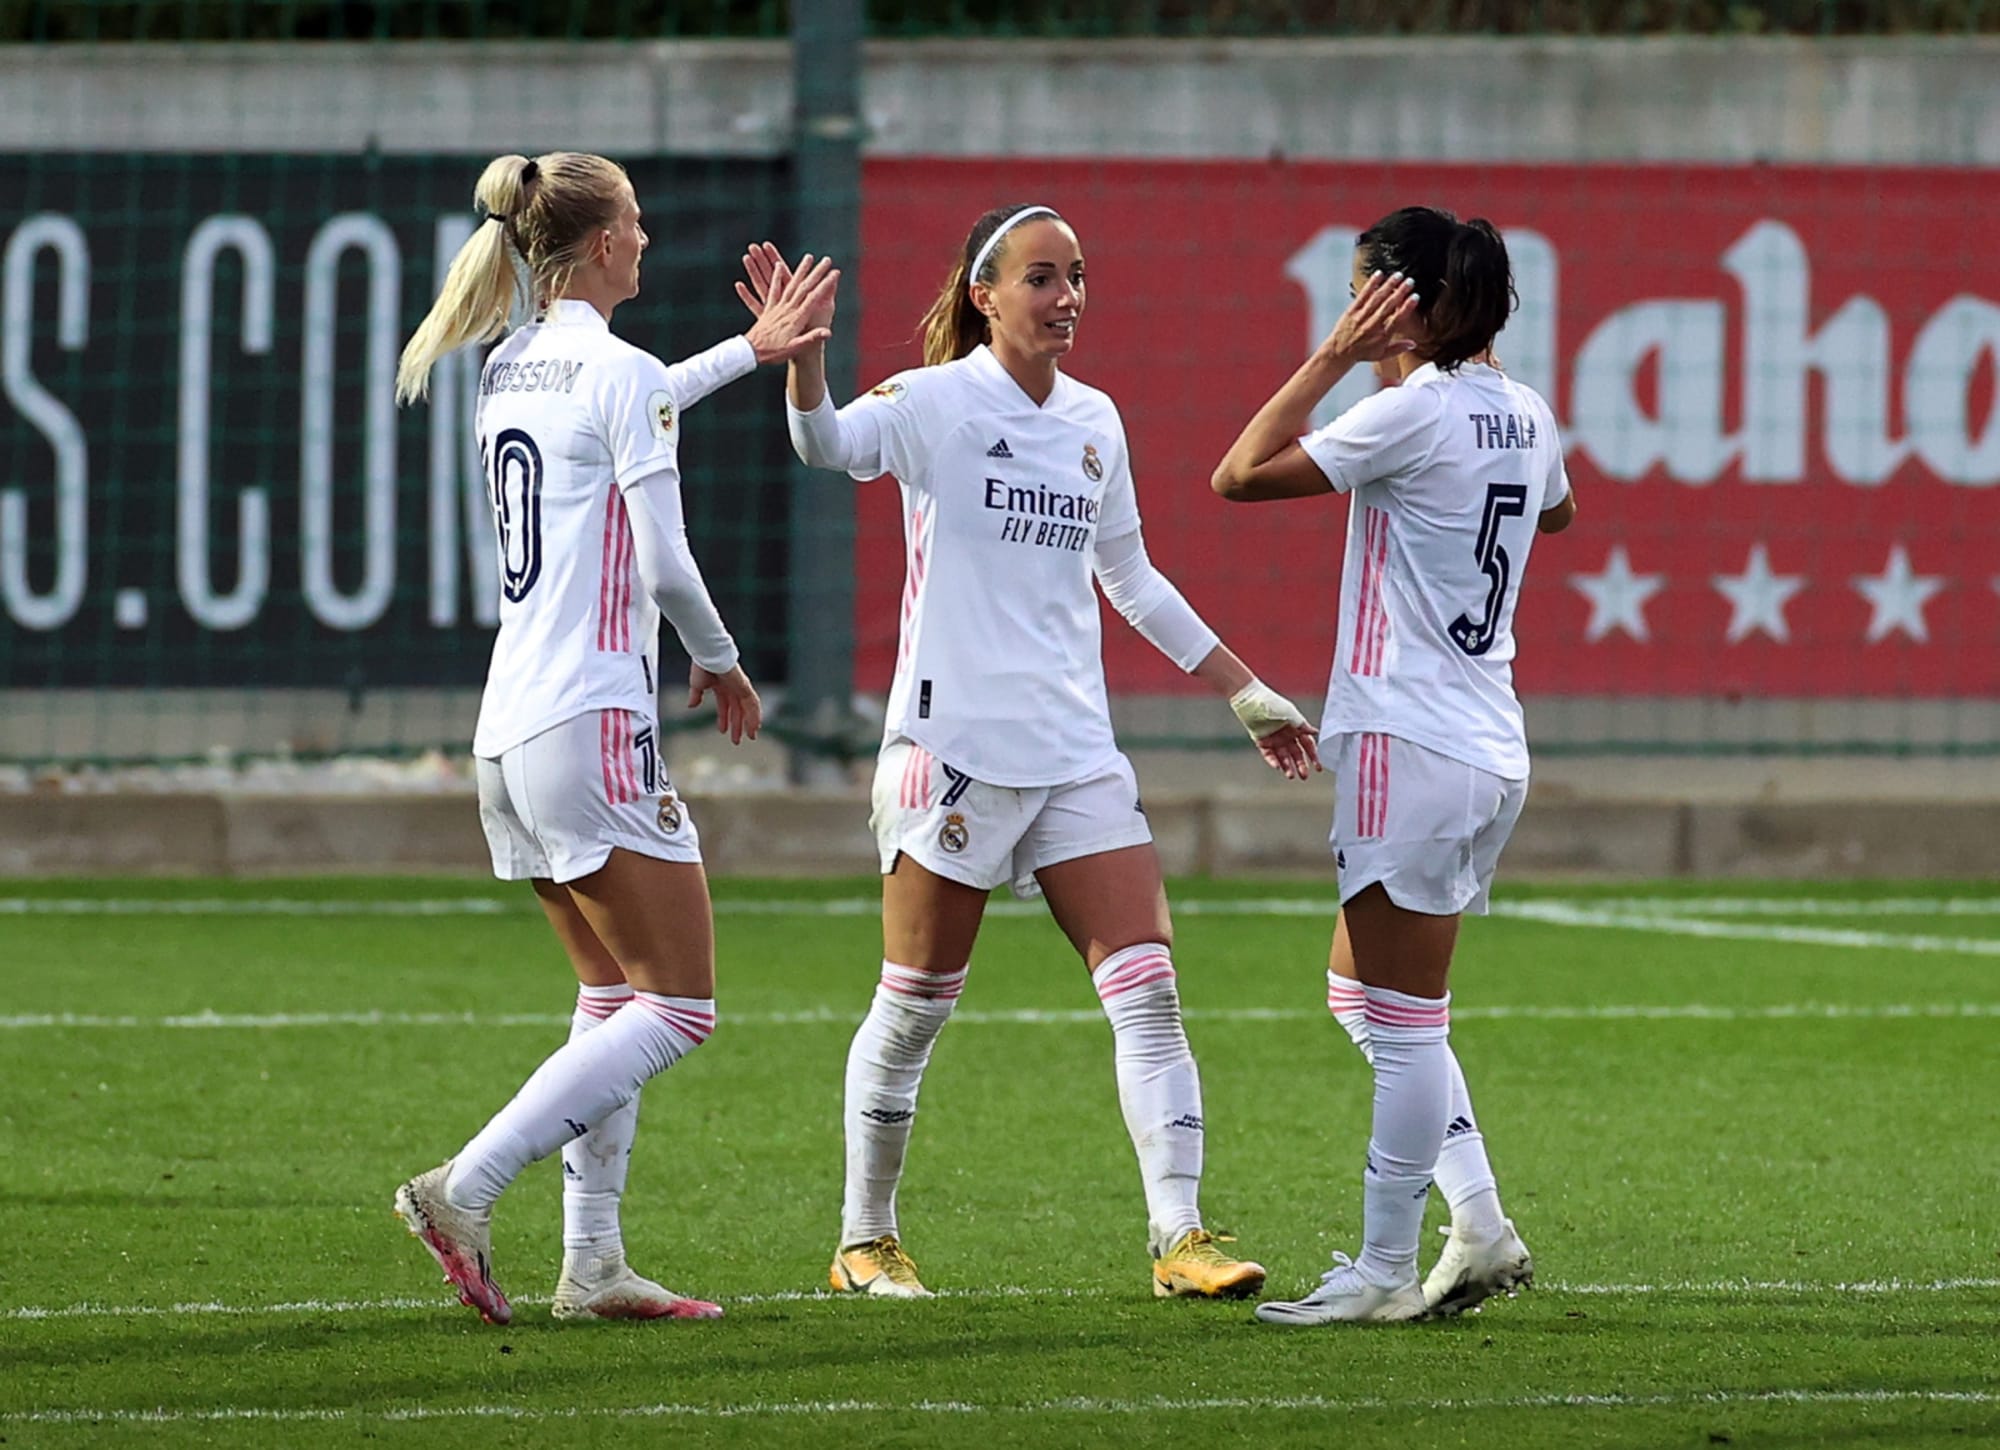 Real Madrid Femenino: Predicted XI For The Match vs. Athletic Club